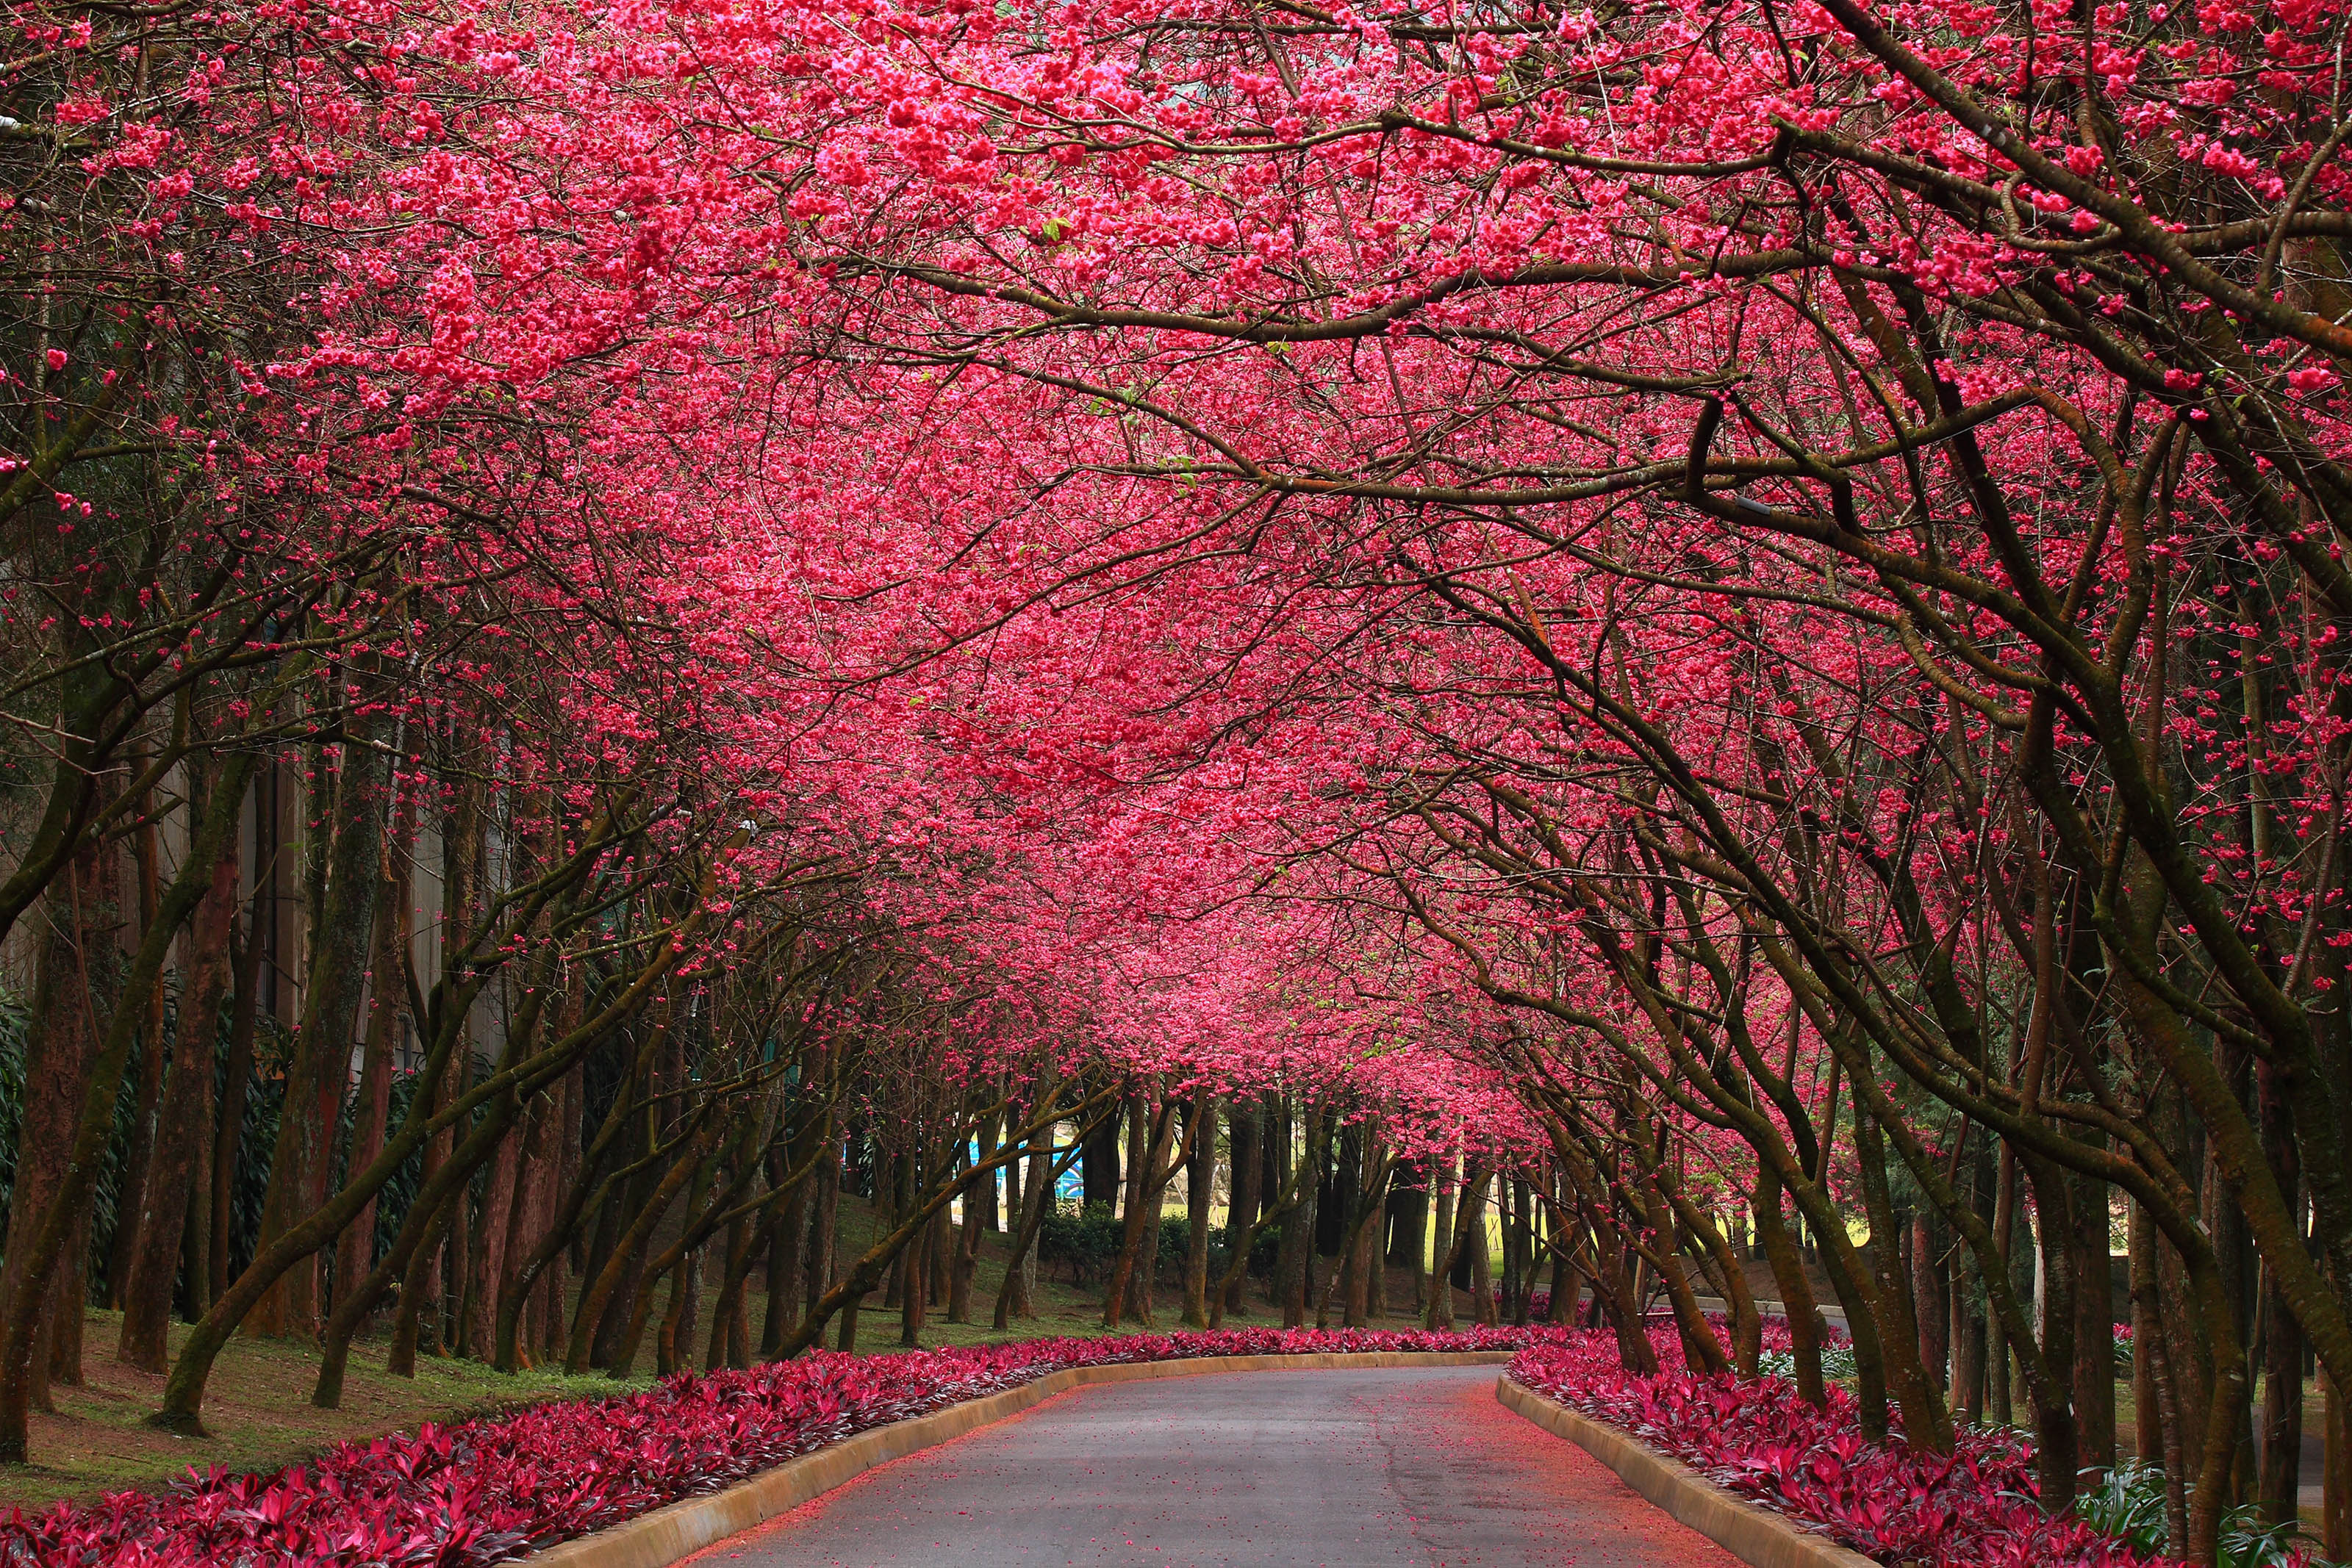 Nature Wallpaper in HD with Flowering Trees in Pink | HD ...